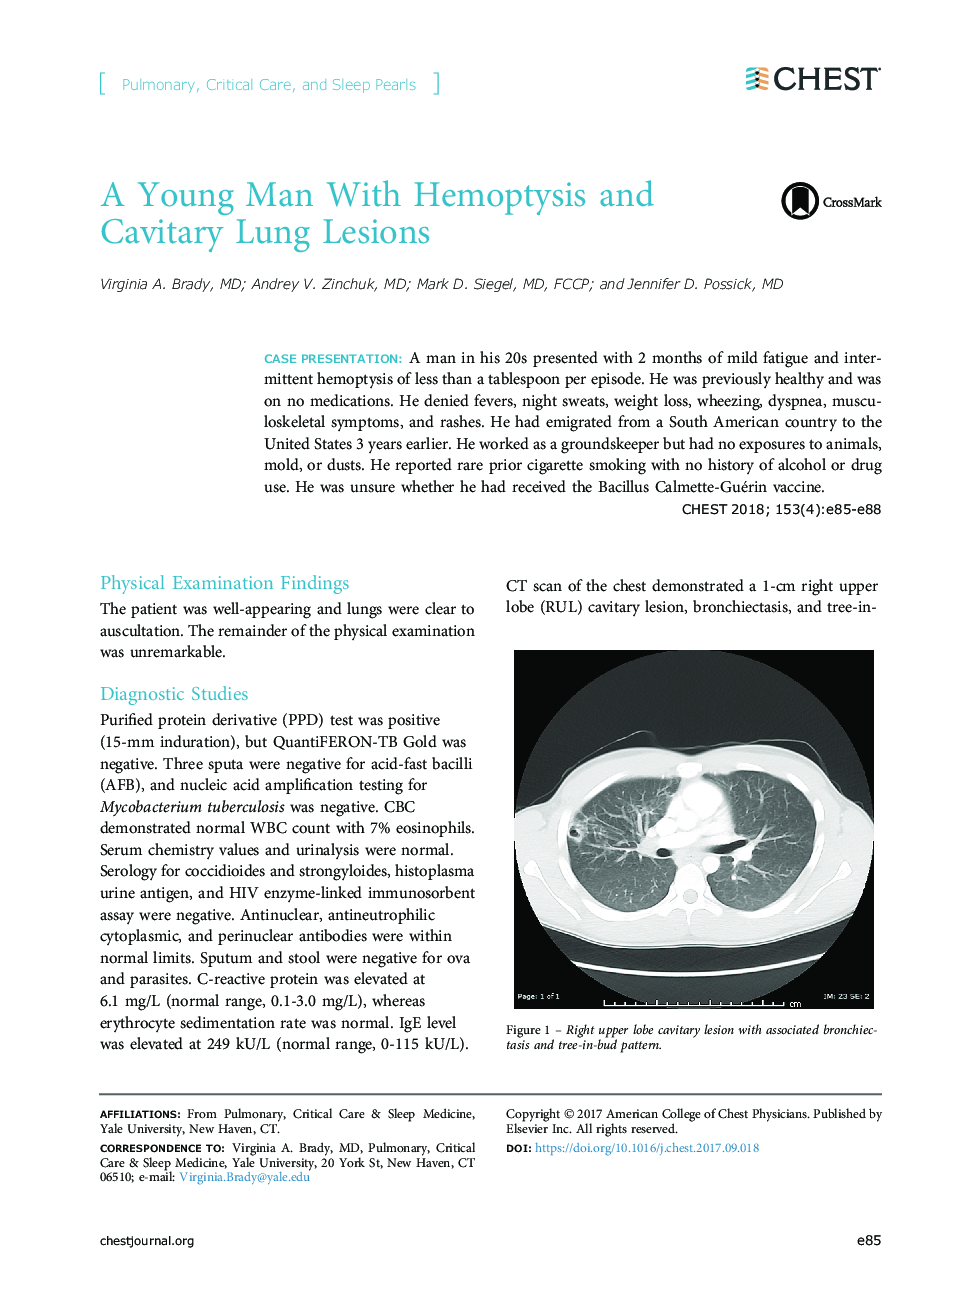 A Young Man With Hemoptysis and Cavitary Lung Lesions